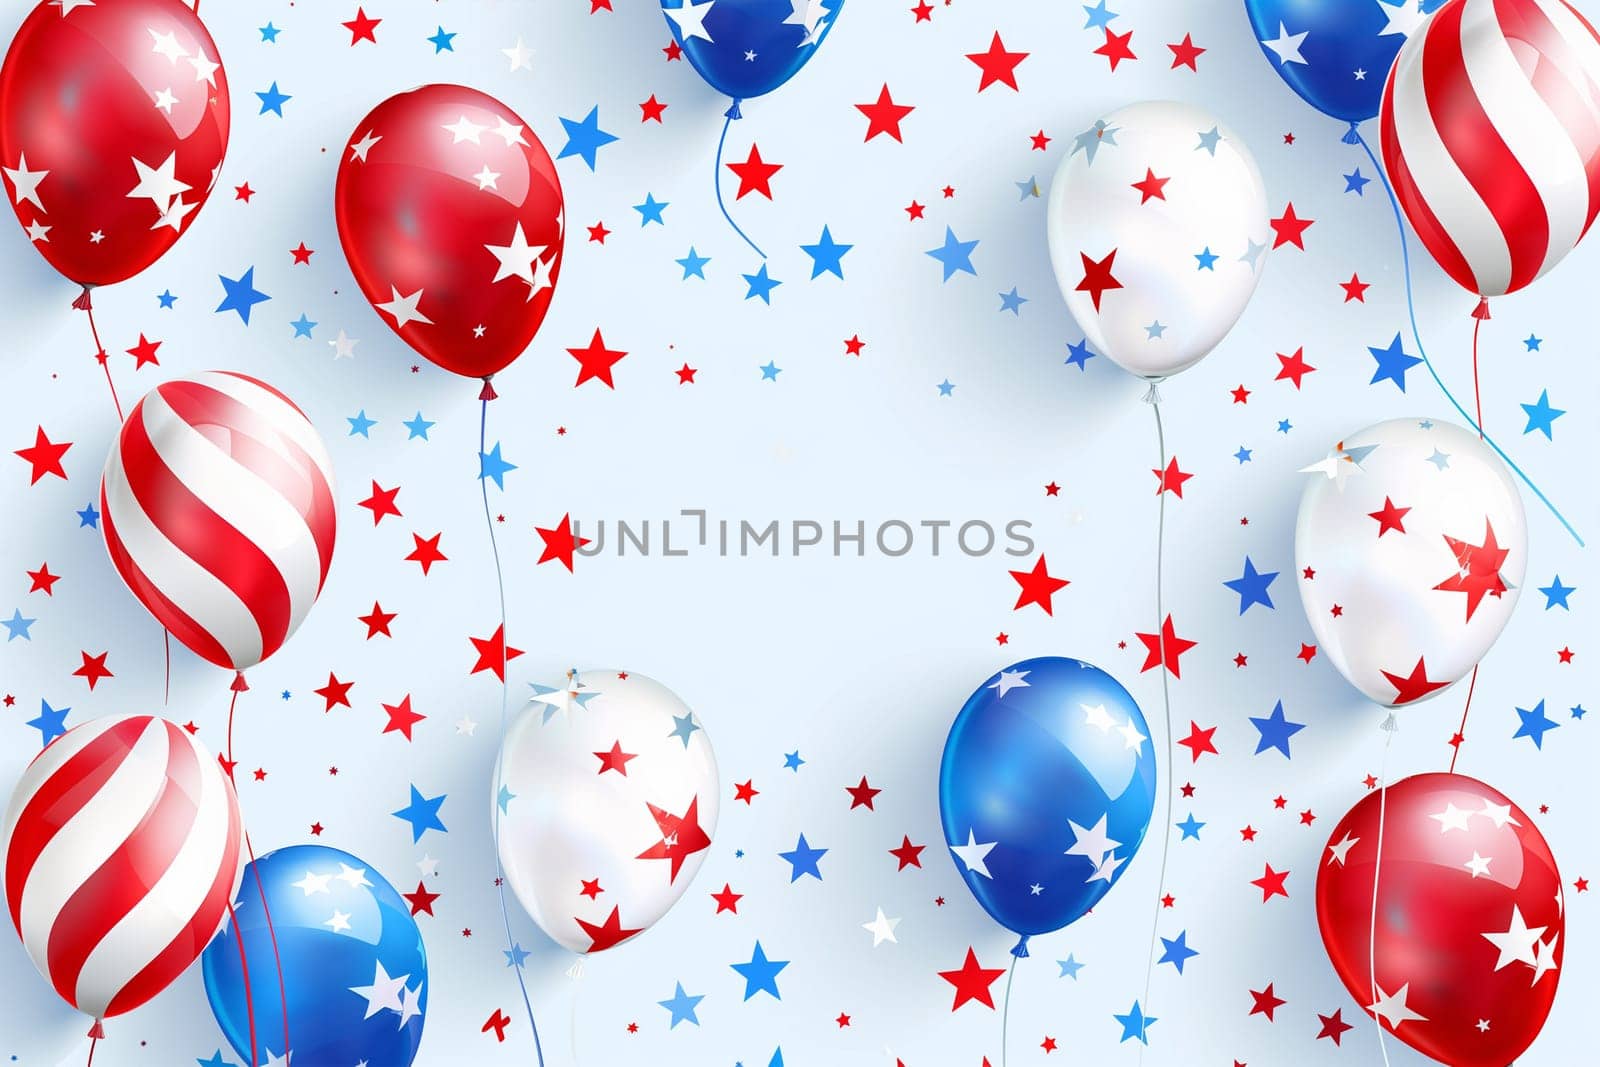 Patriotism-themed background featuring various colorful balloons and shining stars against a patriotic backdrop.